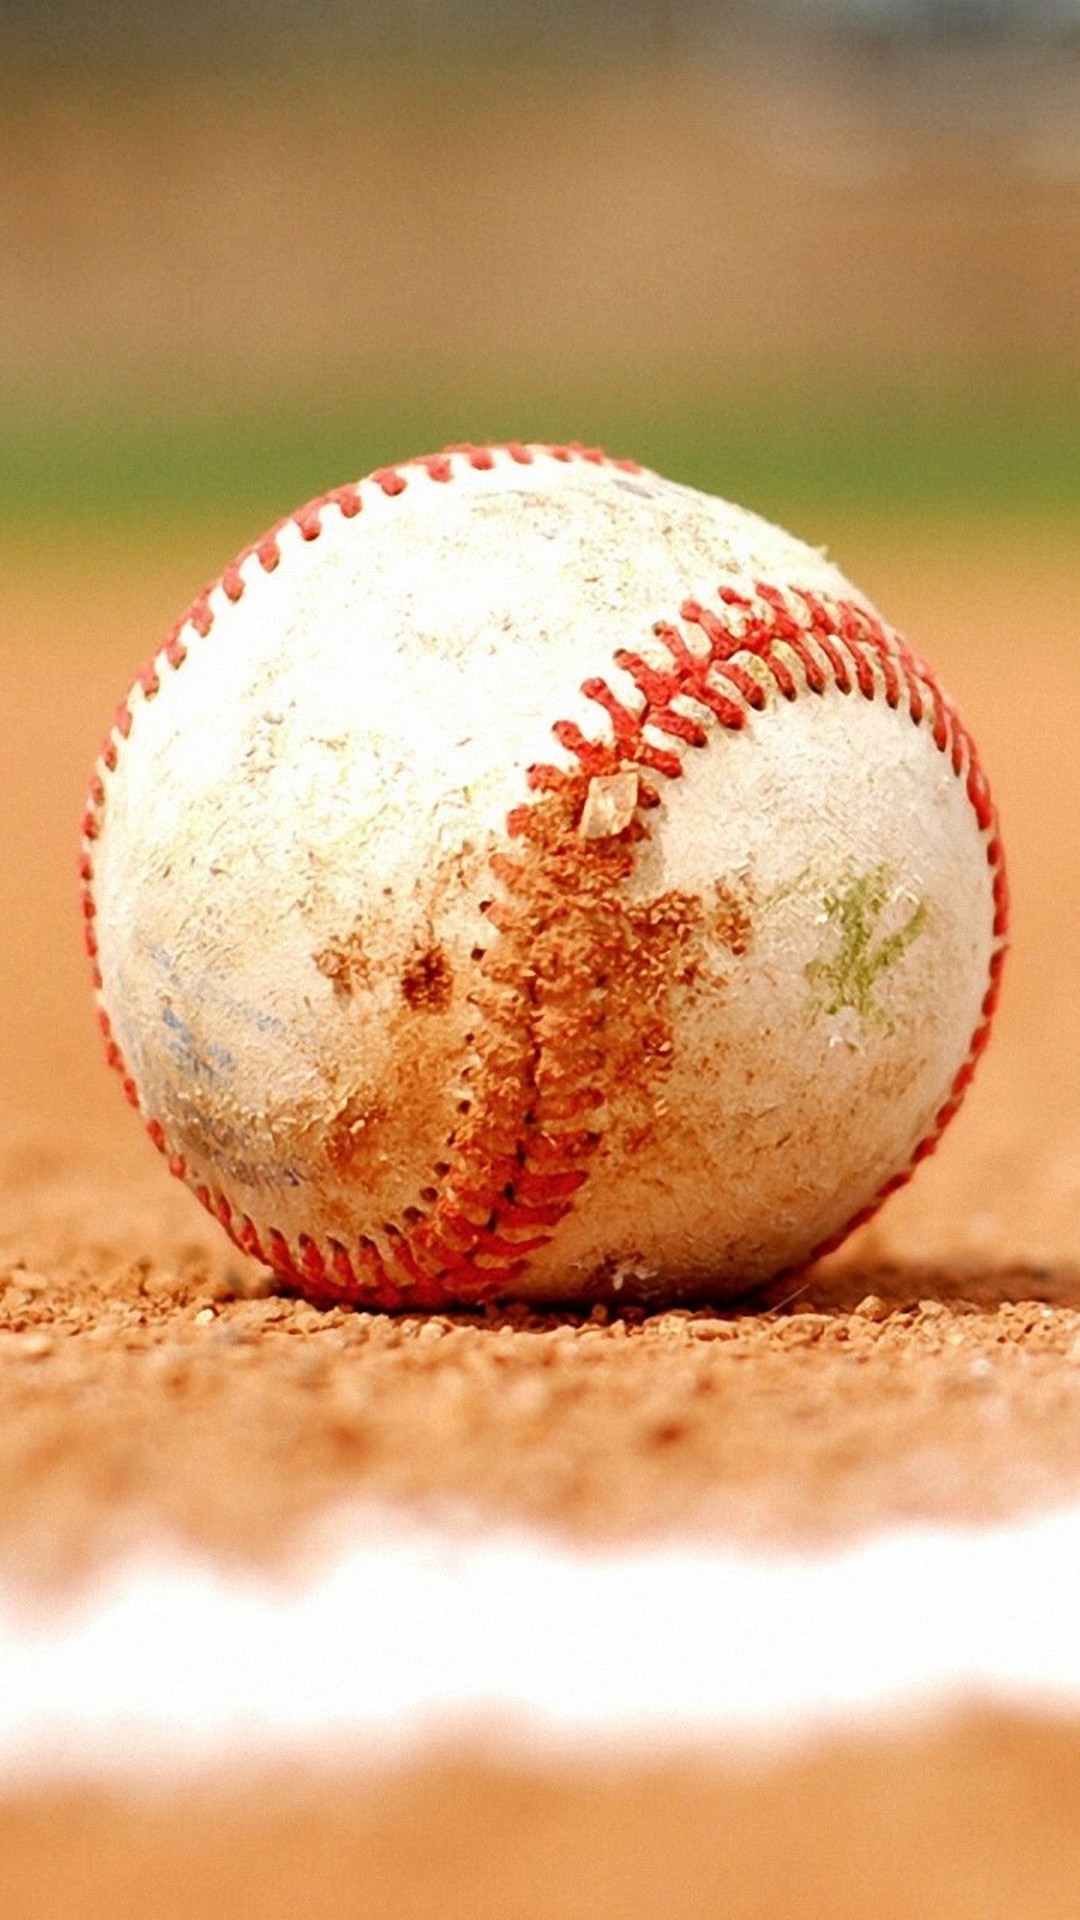 Mobile Wallpaper Baseball with high-resolution 1080x1920 pixel. You can use this wallpaper for Mac Desktop Wallpaper, Laptop Screensavers, Android Wallpapers, Tablet or iPhone Home Screen and another mobile phone device